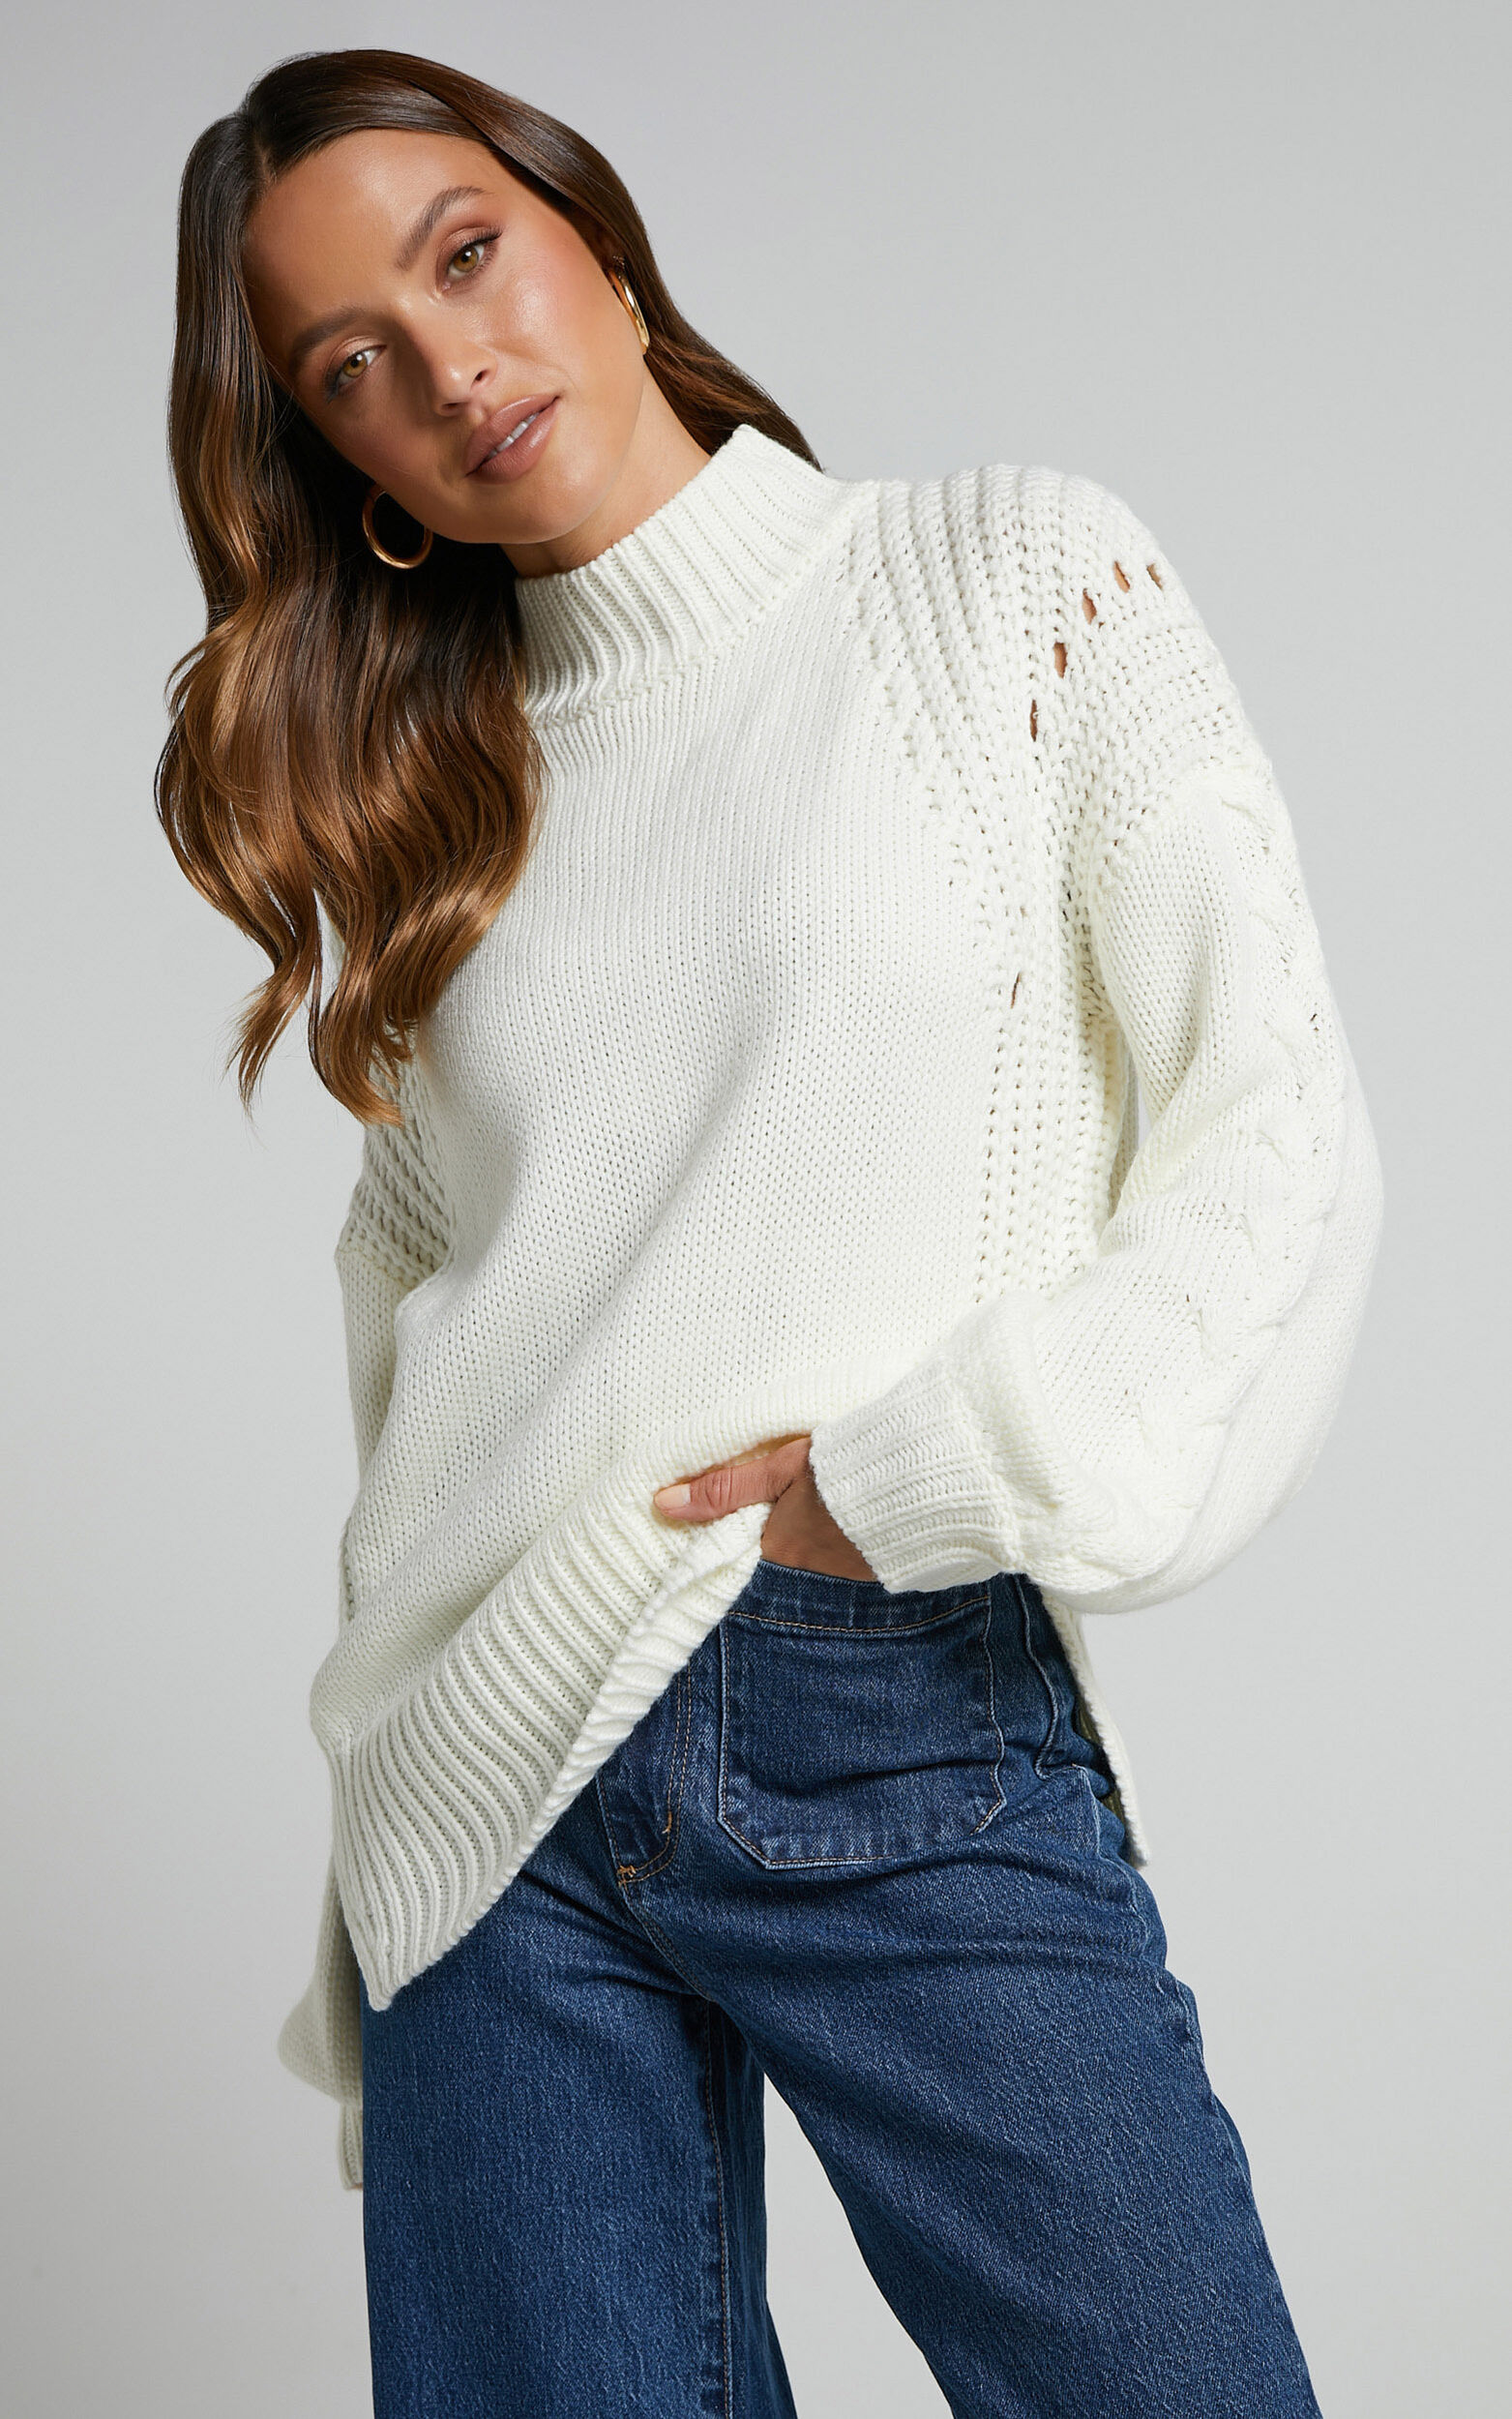 Trizia Jumper - Long Sleeve High Neck Pointelle Knit Jumper in Cream - 06, CRE1